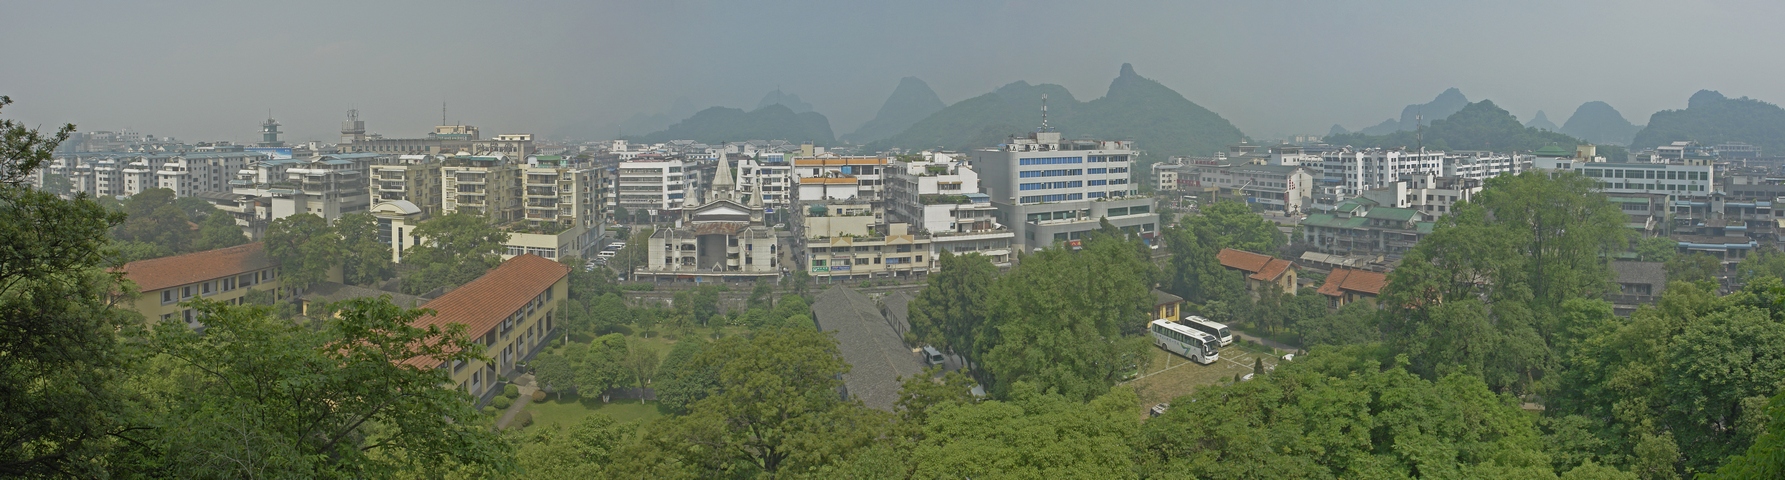 Guilin21.jpg - 4 images, Size: 9494 x 2553, FOV: 177.02 x 44.46, RMS: 2.66, Lens: Standard, Projection: Cylindrical, Color: None